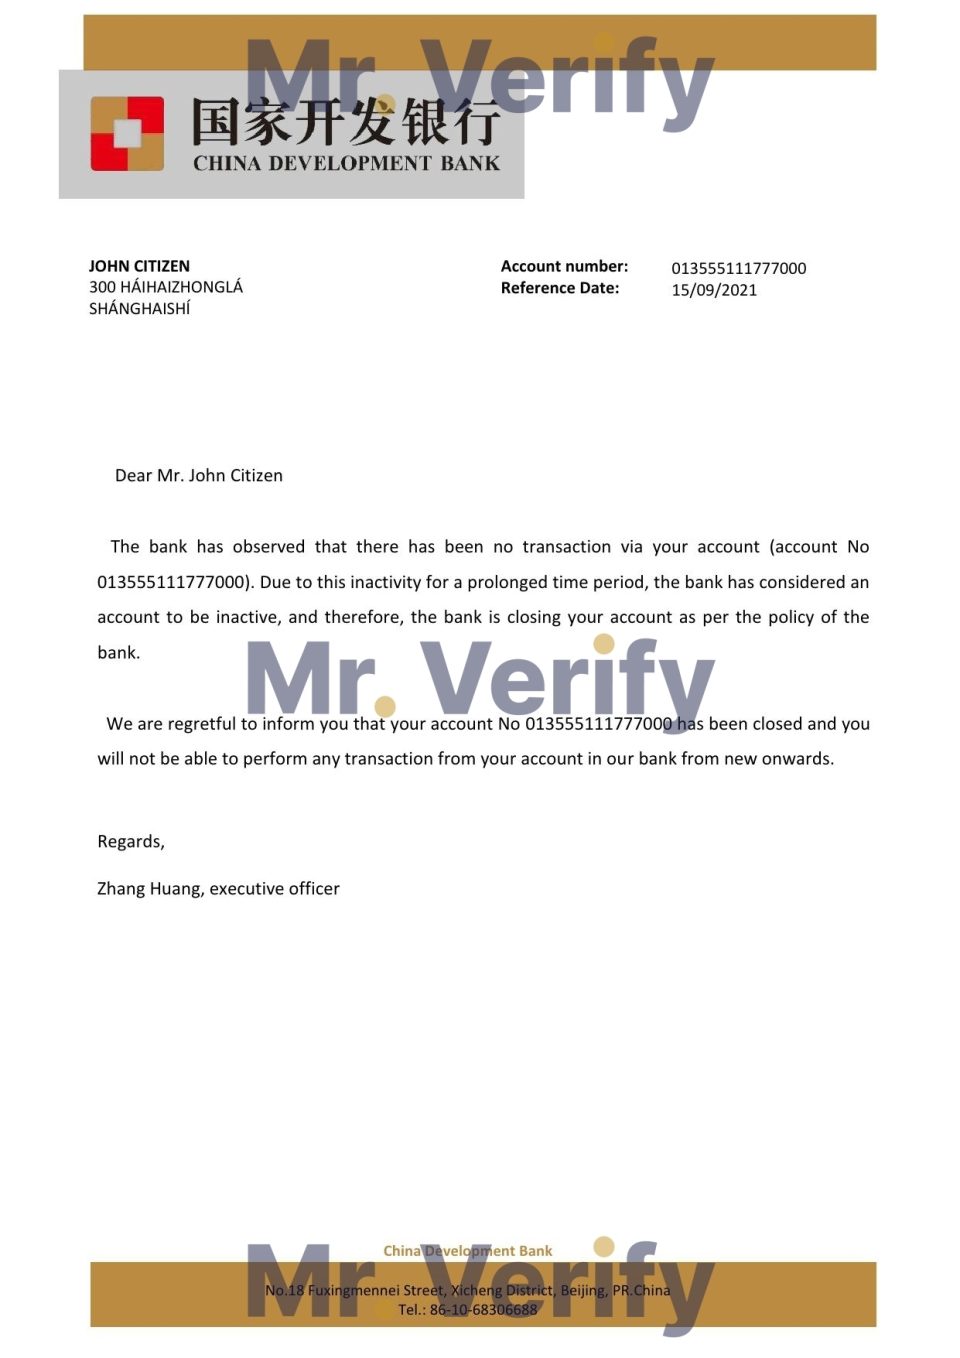 Download China Development Bank Reference Letter Templates | Editable Word